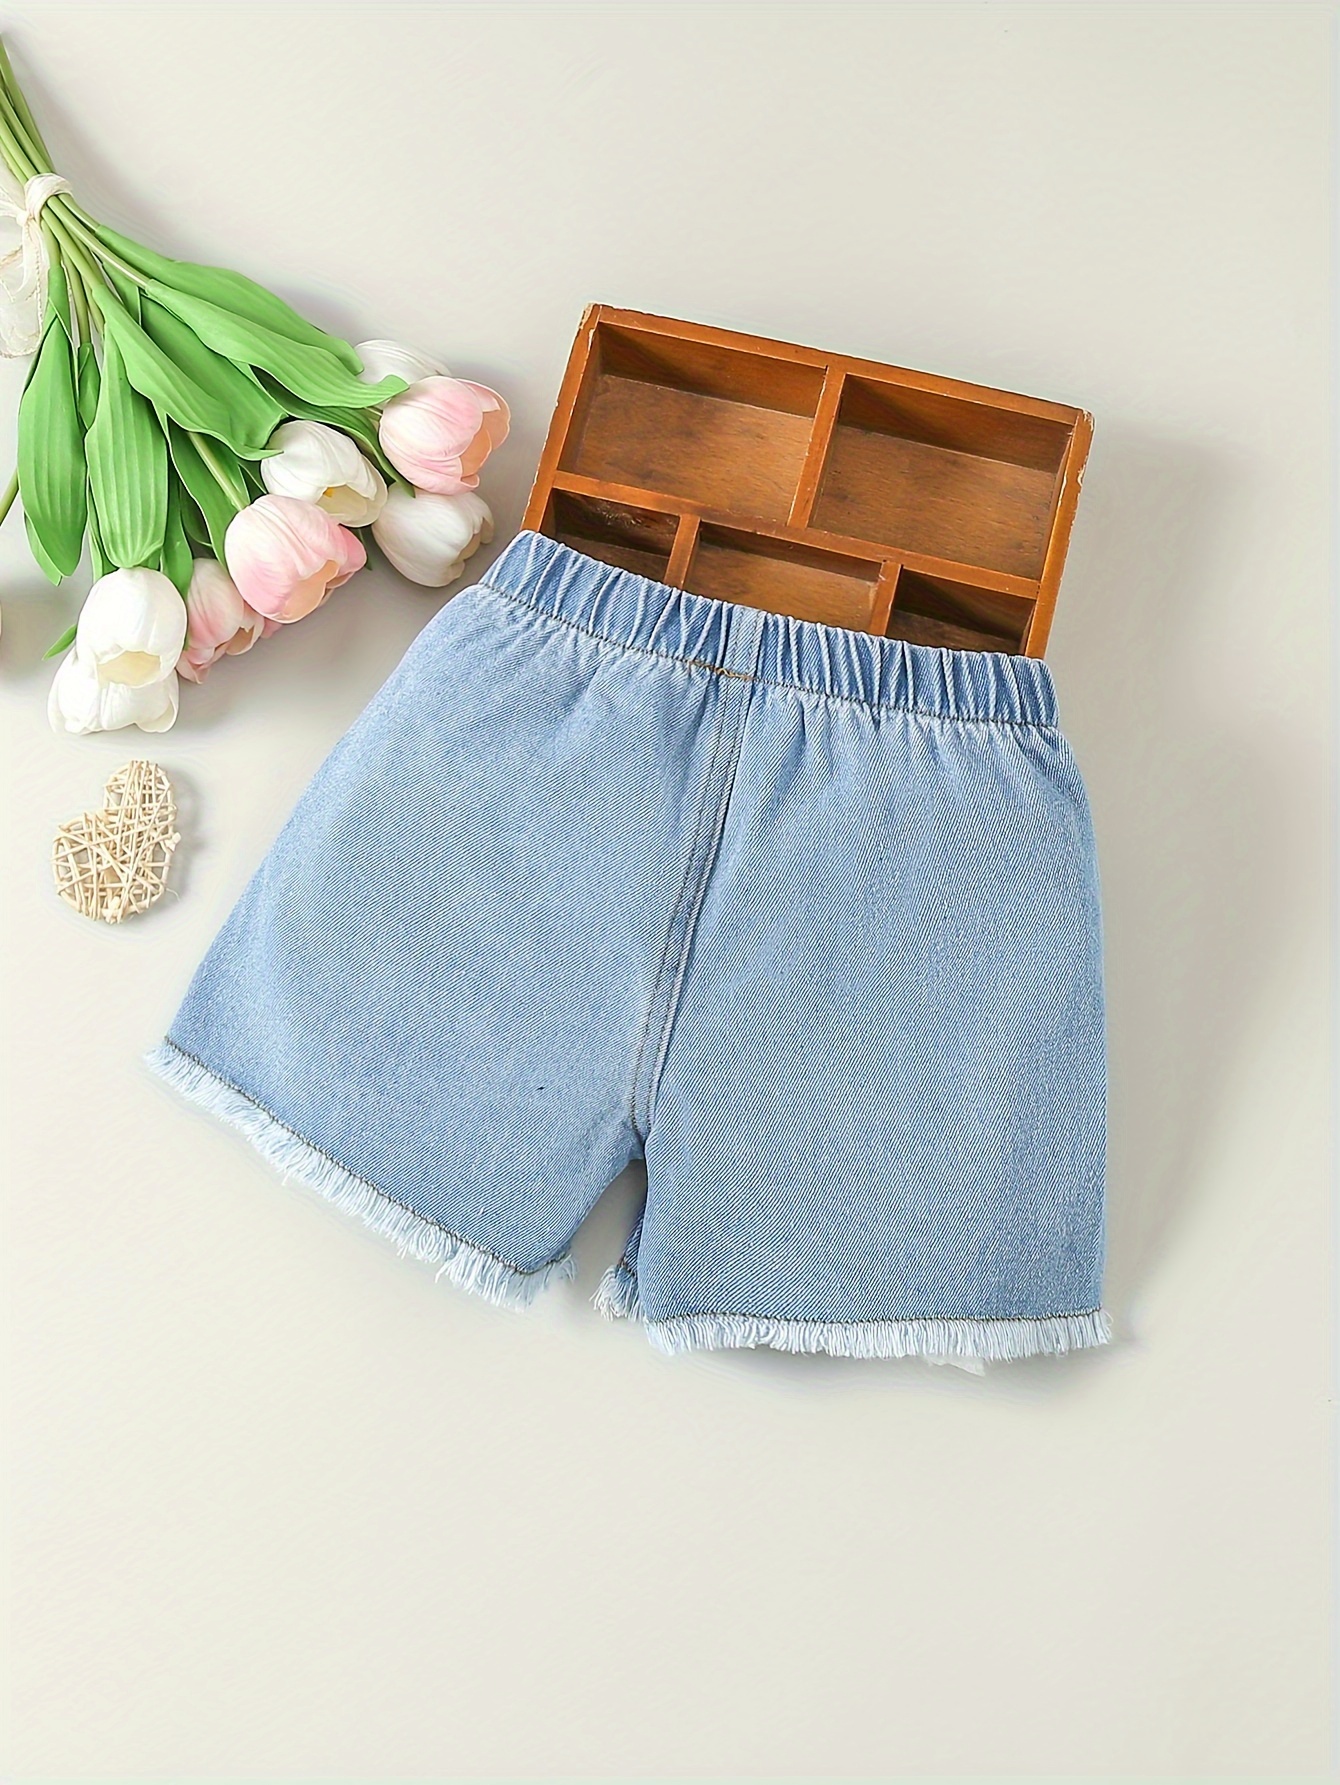 Summer Baggy Jean Shorts Womens For Women Fashionable, Casual, And